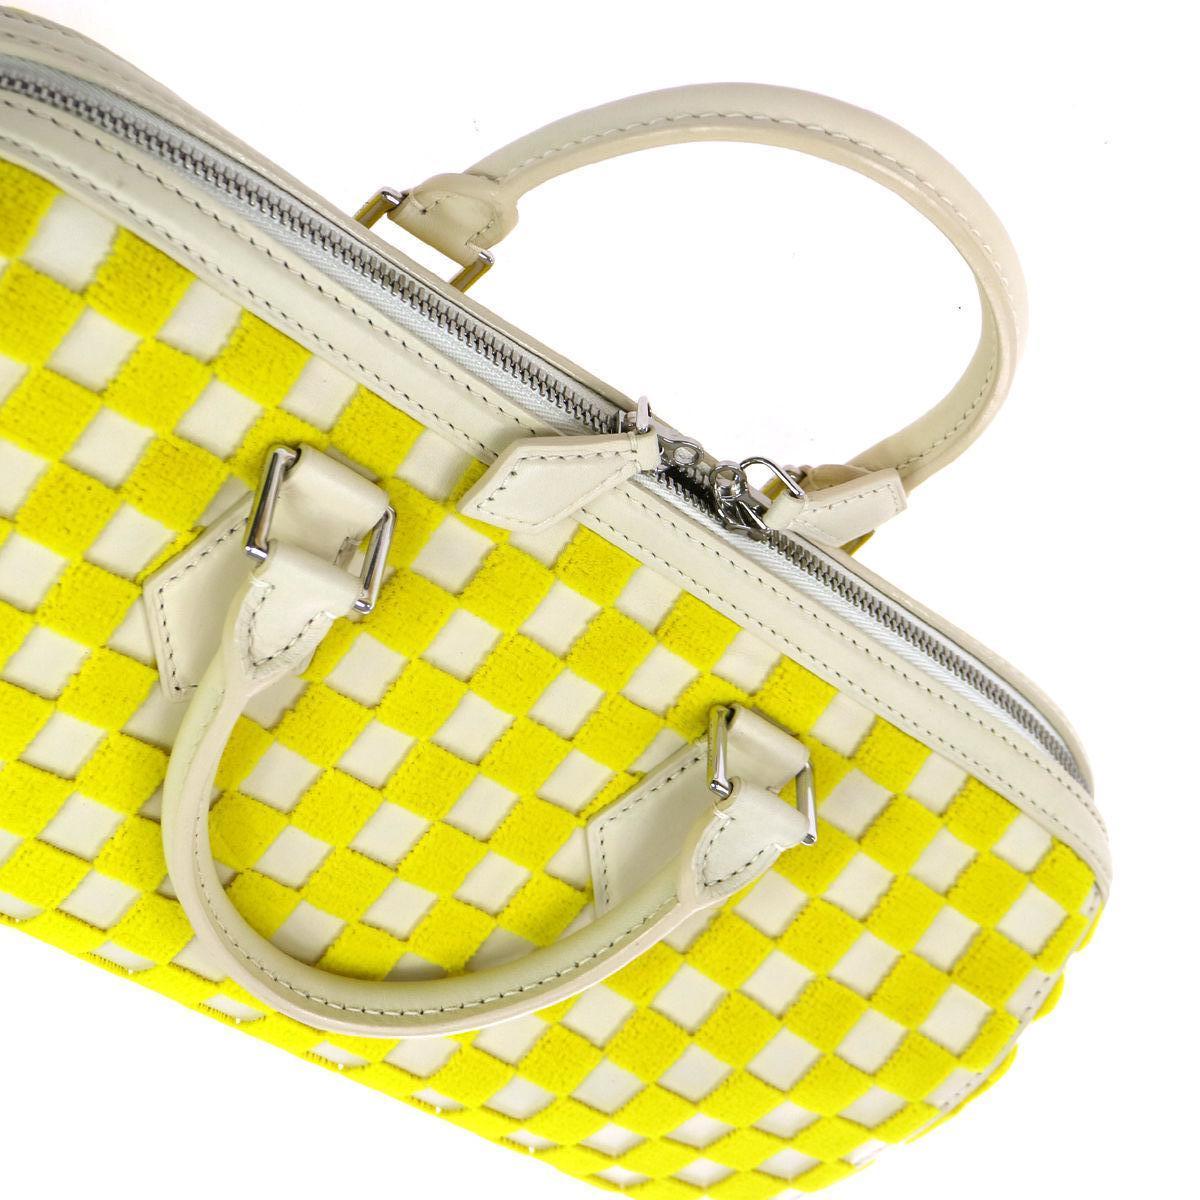 Louis Vuitton Ivory Yellow Fabric Leather Top Handle Satchel Bag W/Accessories

Fabric
Leather
Silver tone hardware
Woven lining
Date code present
Made in France
Handle drop 3